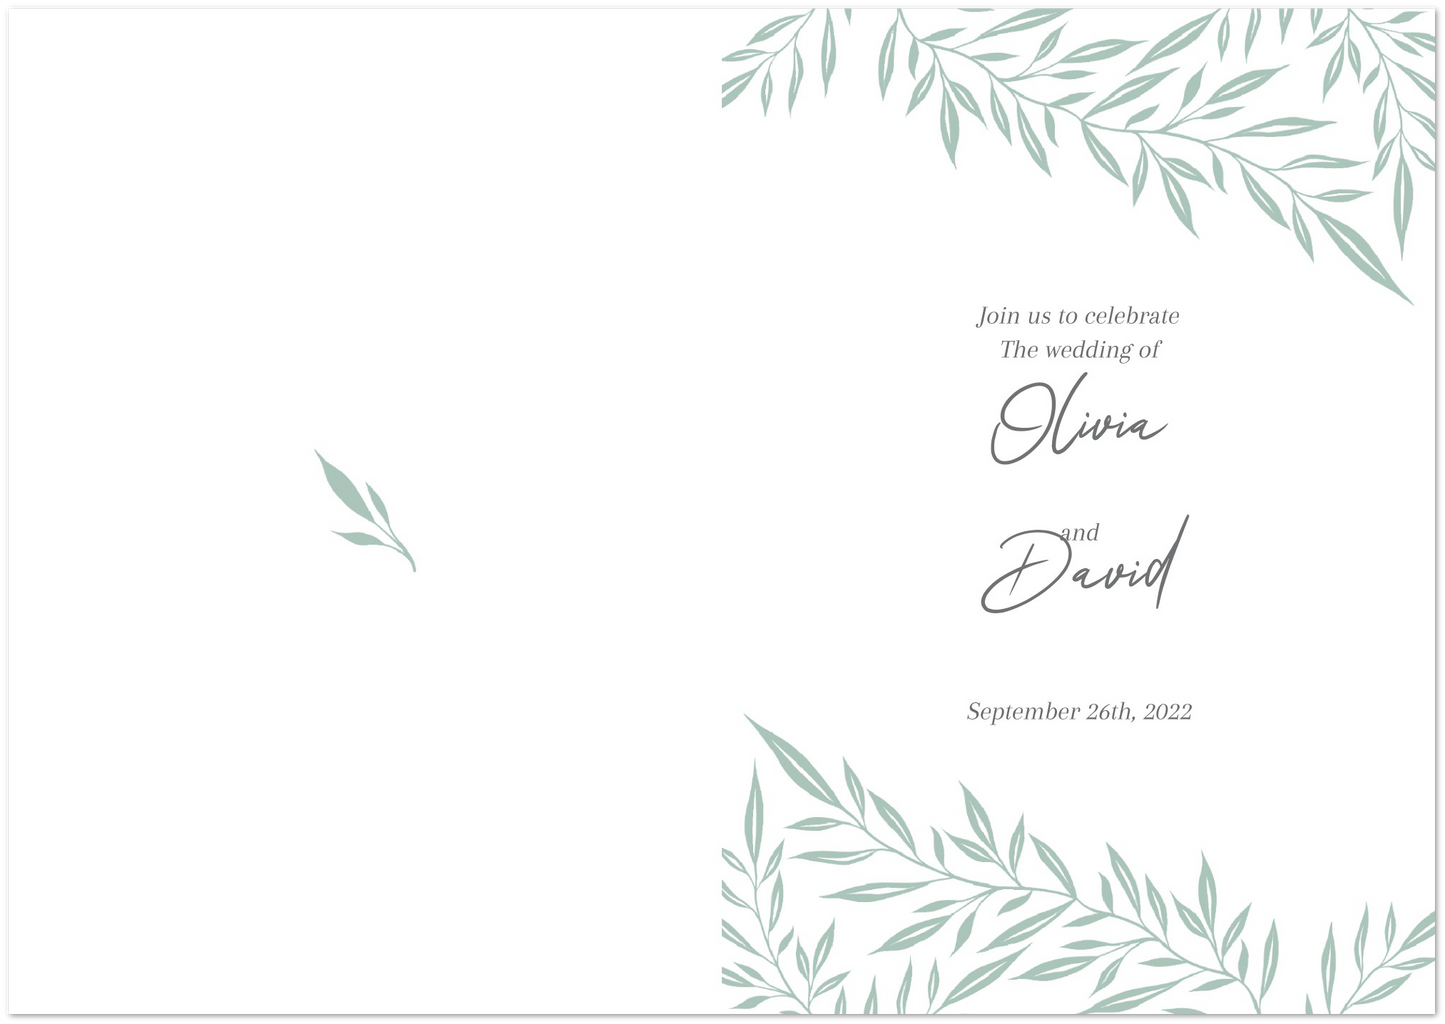 Tiny Branches Wedding invitations (sold as packs of 10 folded cards with white envelopes)